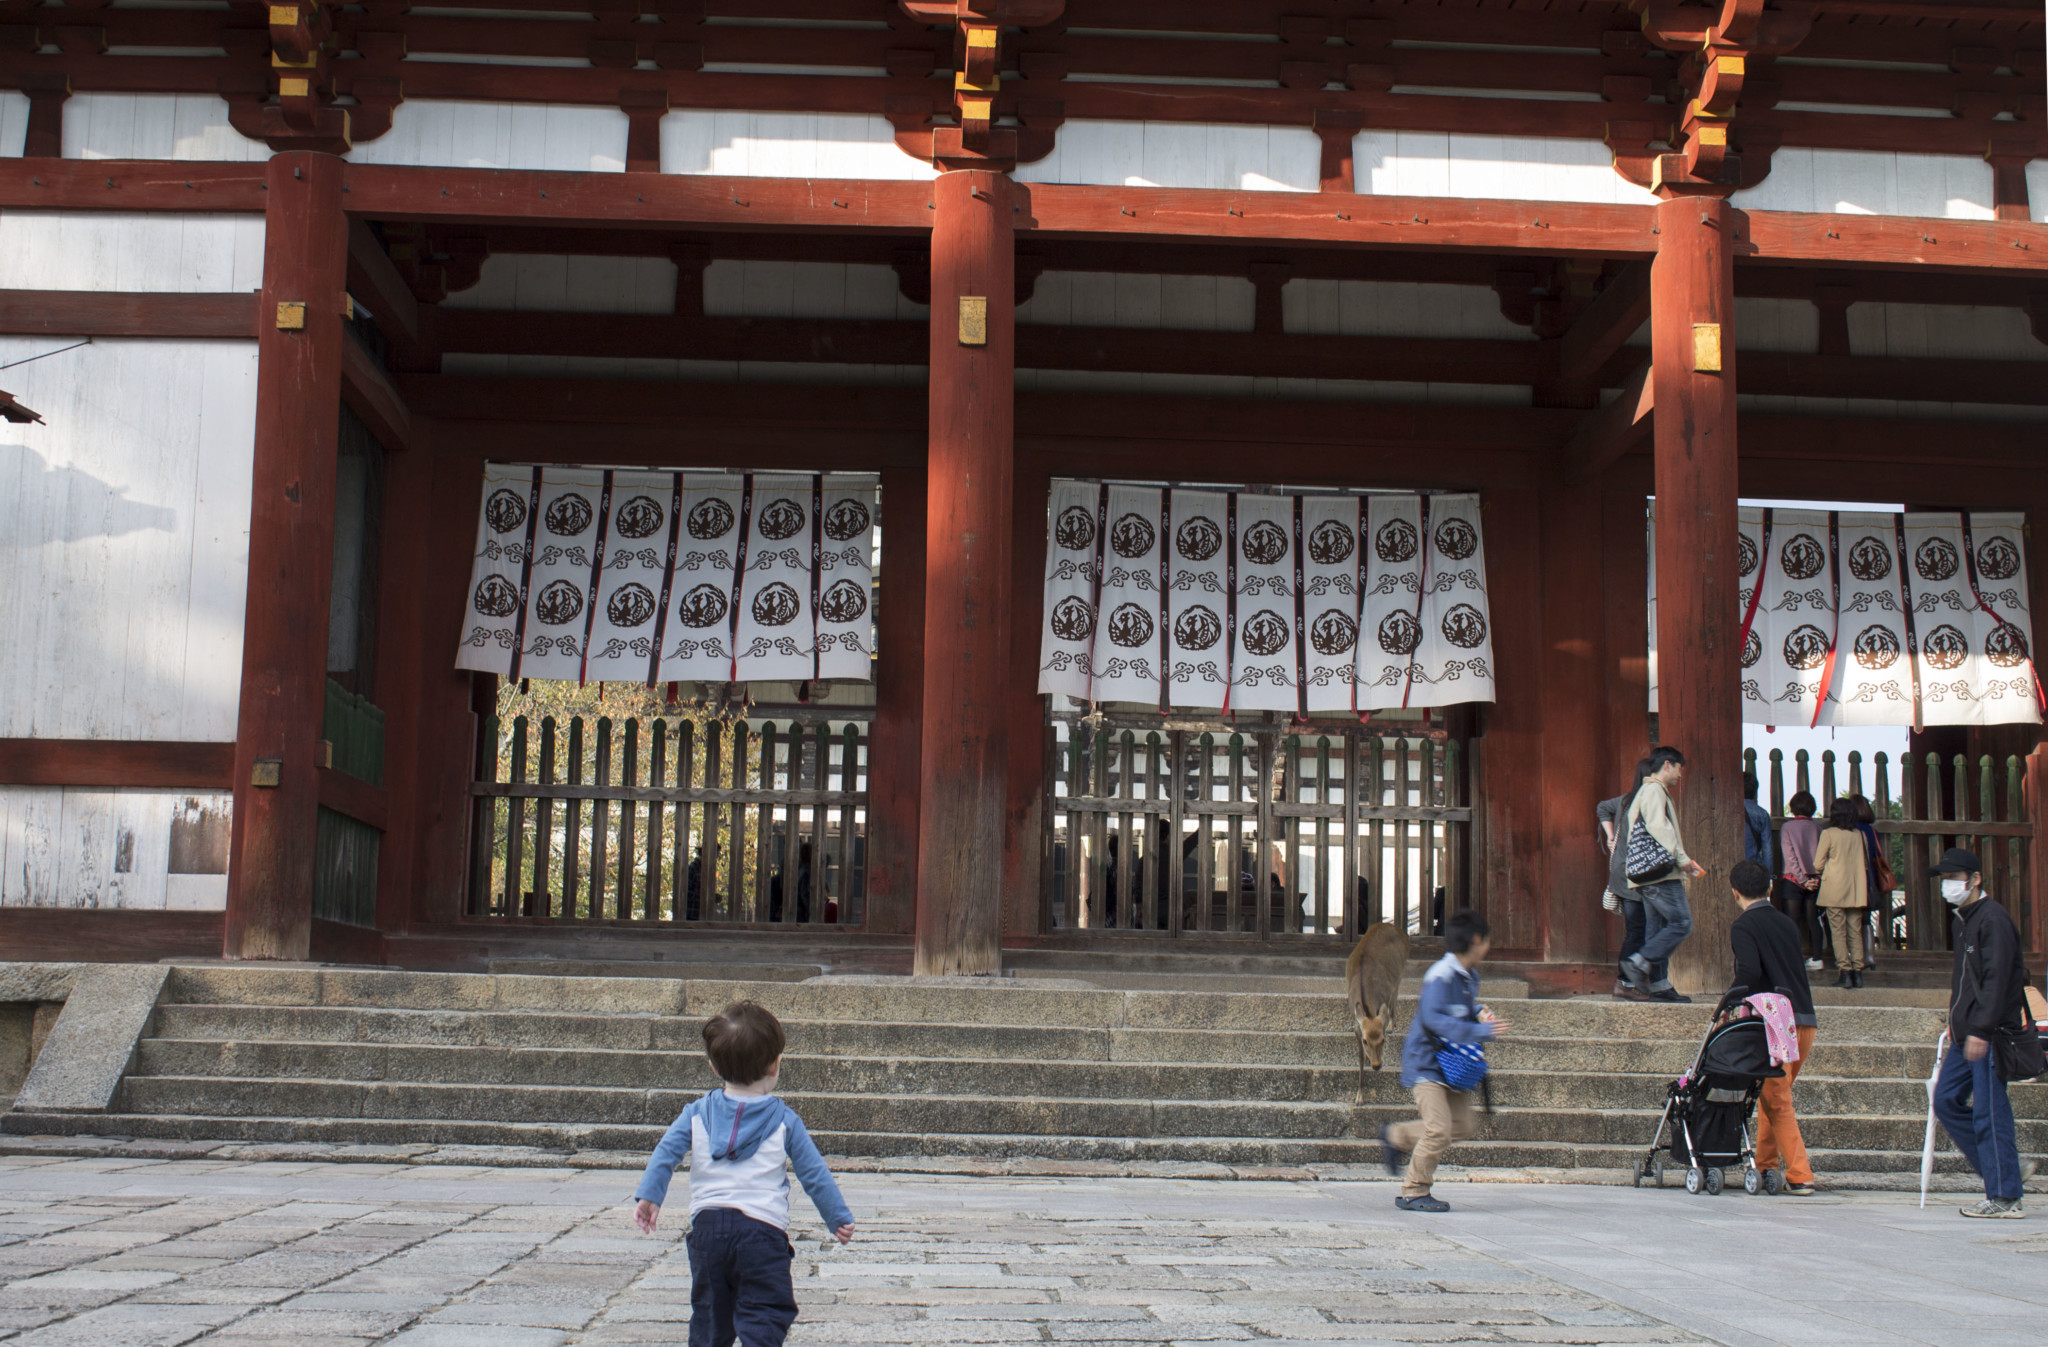 Thoughts from our first trip to Japan with a toddler